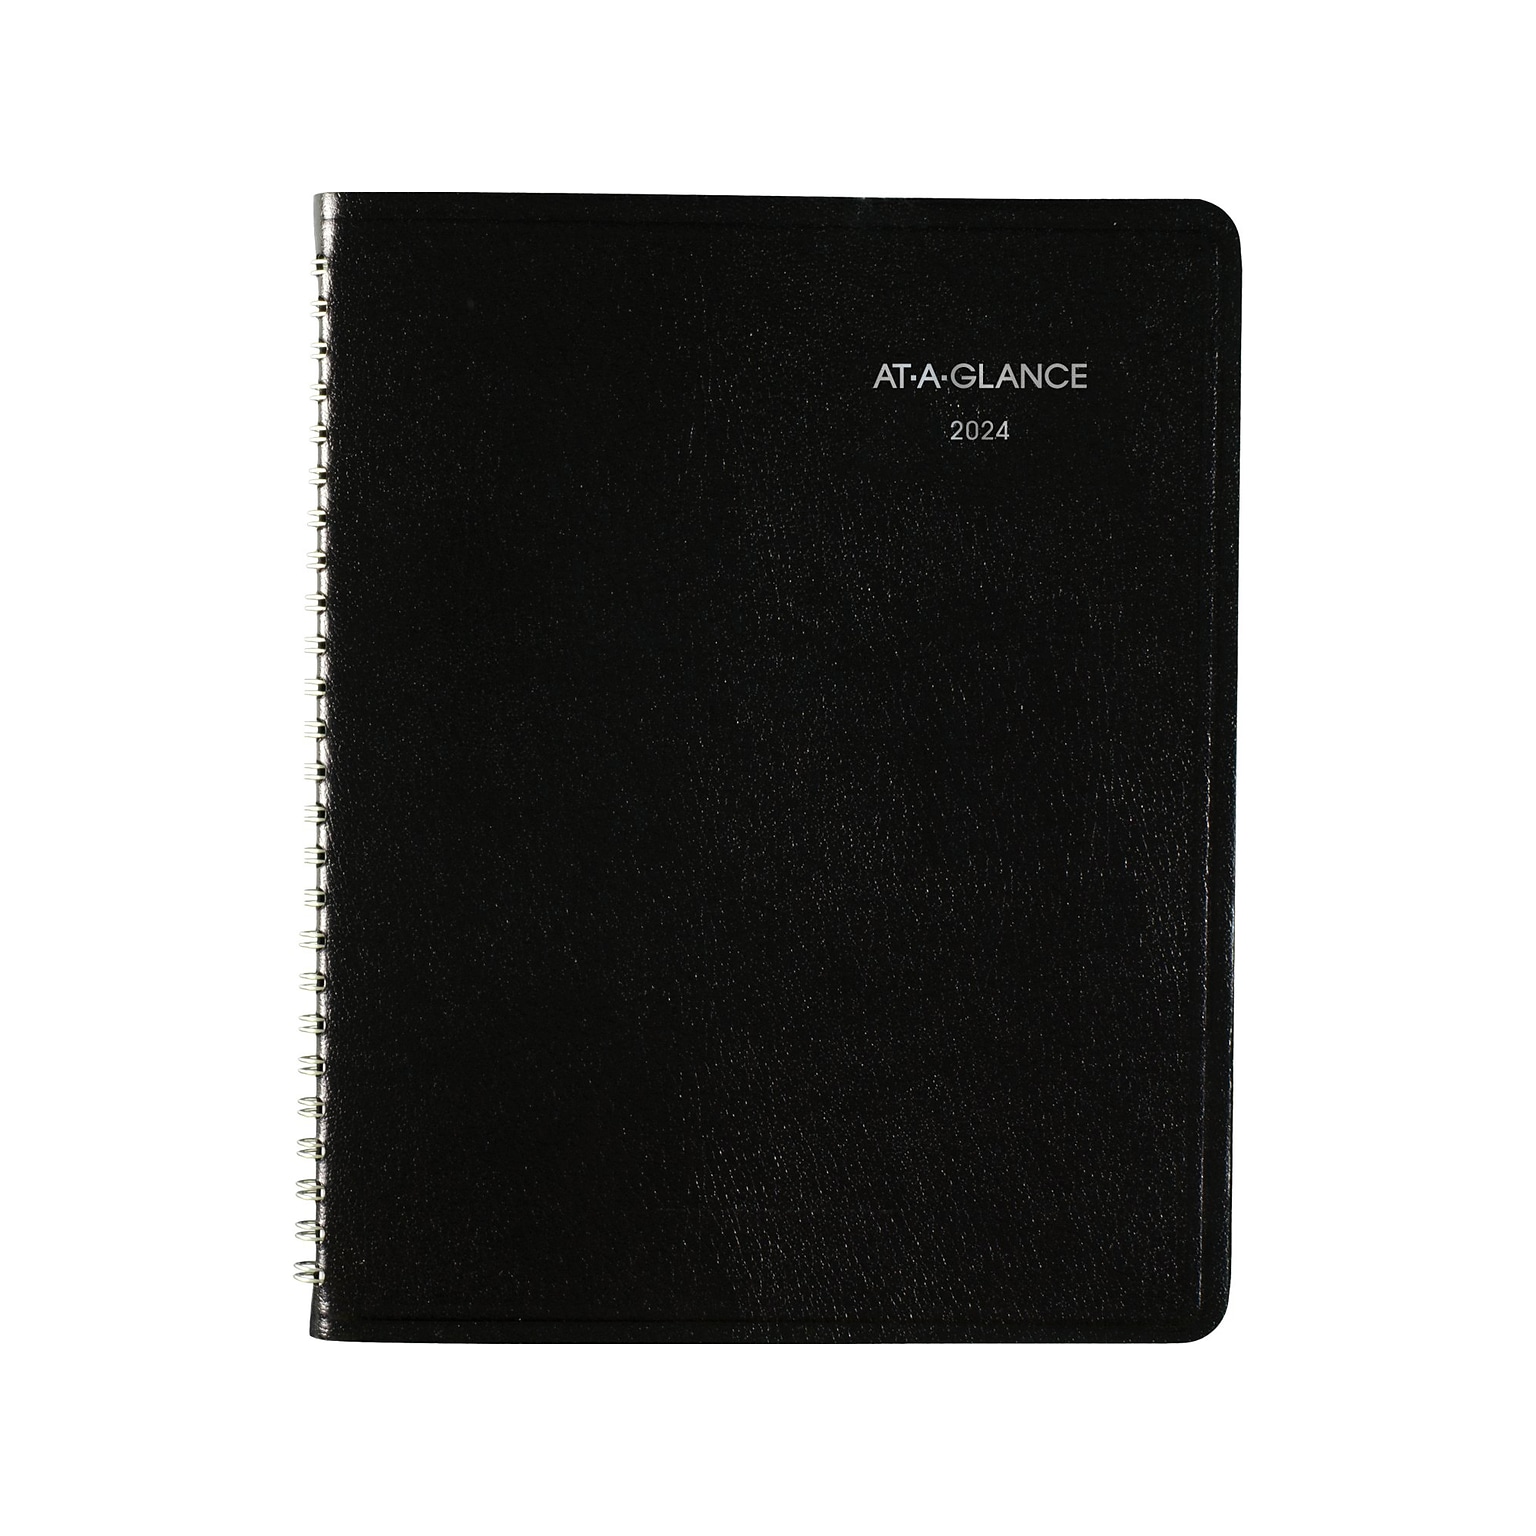 2024 AT-A-GLANCE DayMinder 7 x 8.75 Weekly Planner, Black (G535-00-24)